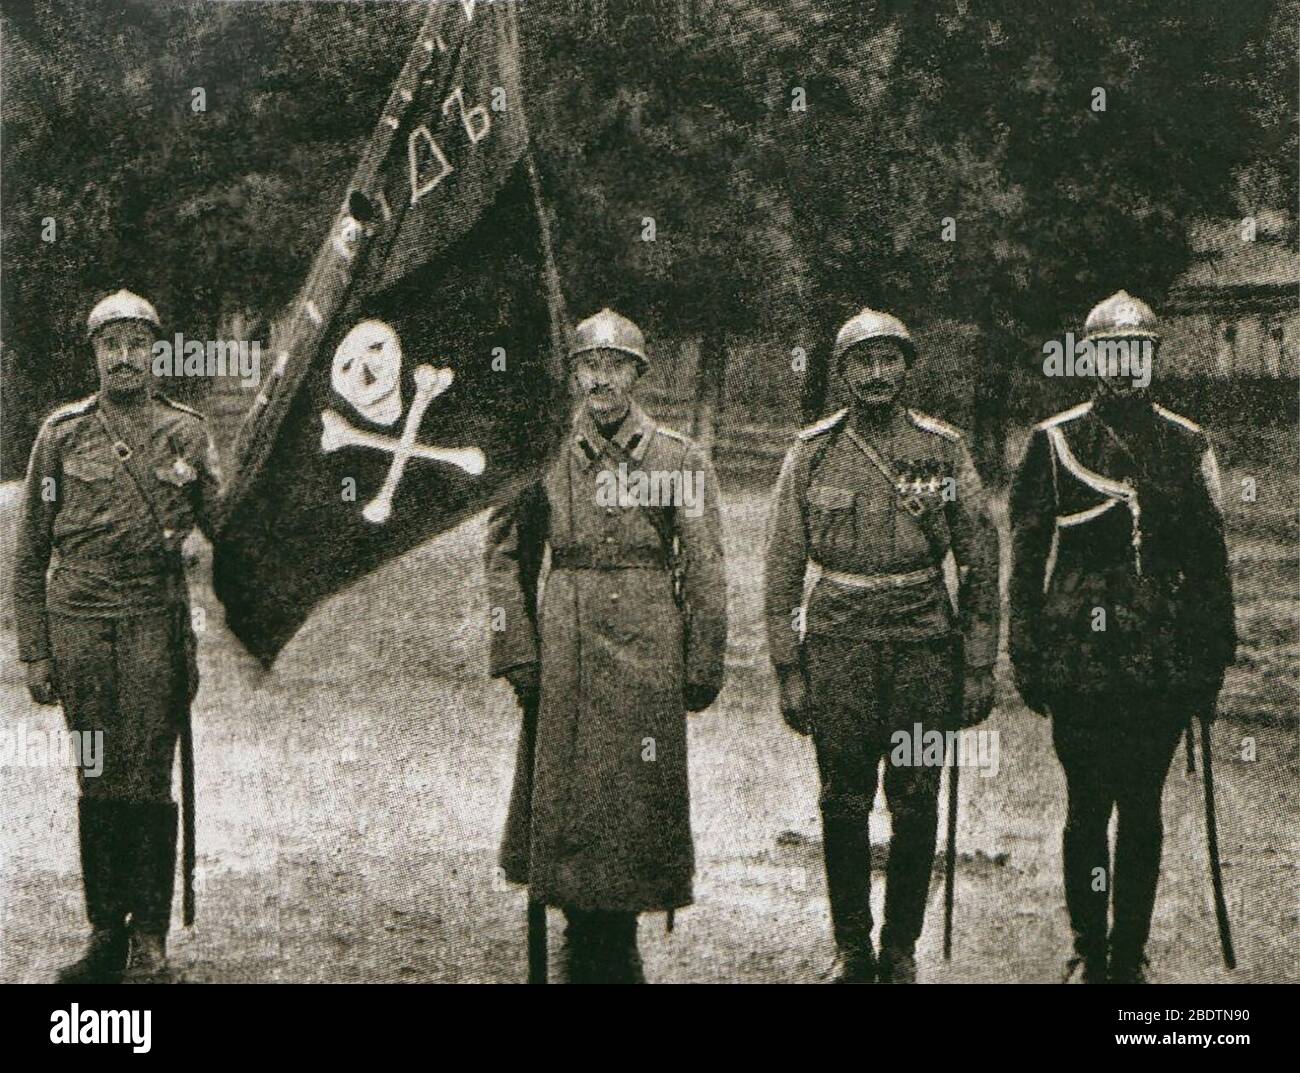 Kornilov's Shock Detachment (8th Army), later became the Volunteer Army's elite Shock Regiment - Flag bearer and honor guard of Kornilov's Shock Detachment, a part of the 8th Army (Russian Empire). World War I, Eastern Front, 1917. Stock Photo